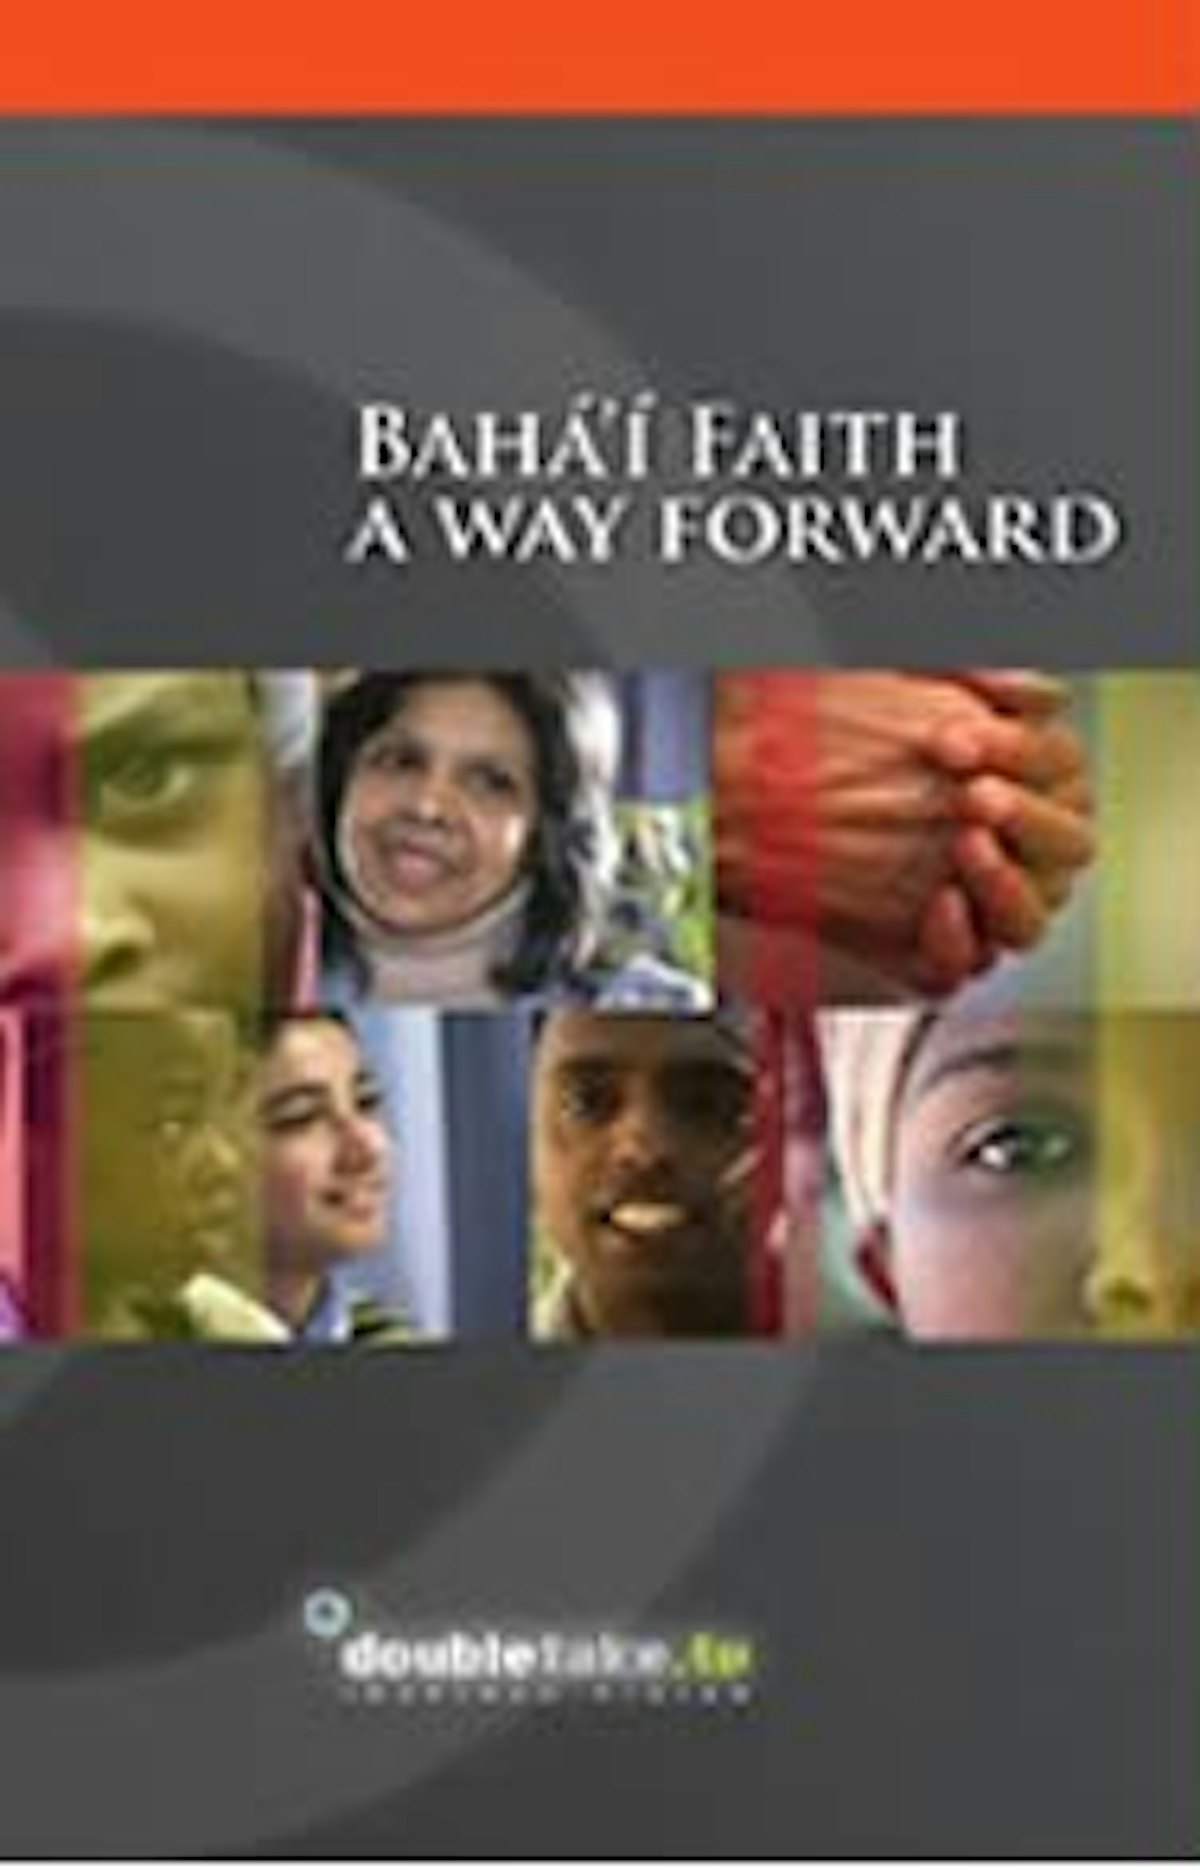 "We created this film to show what the Baha'i Faith has to offer on a practical level for the world," said Leyla Haidarian.